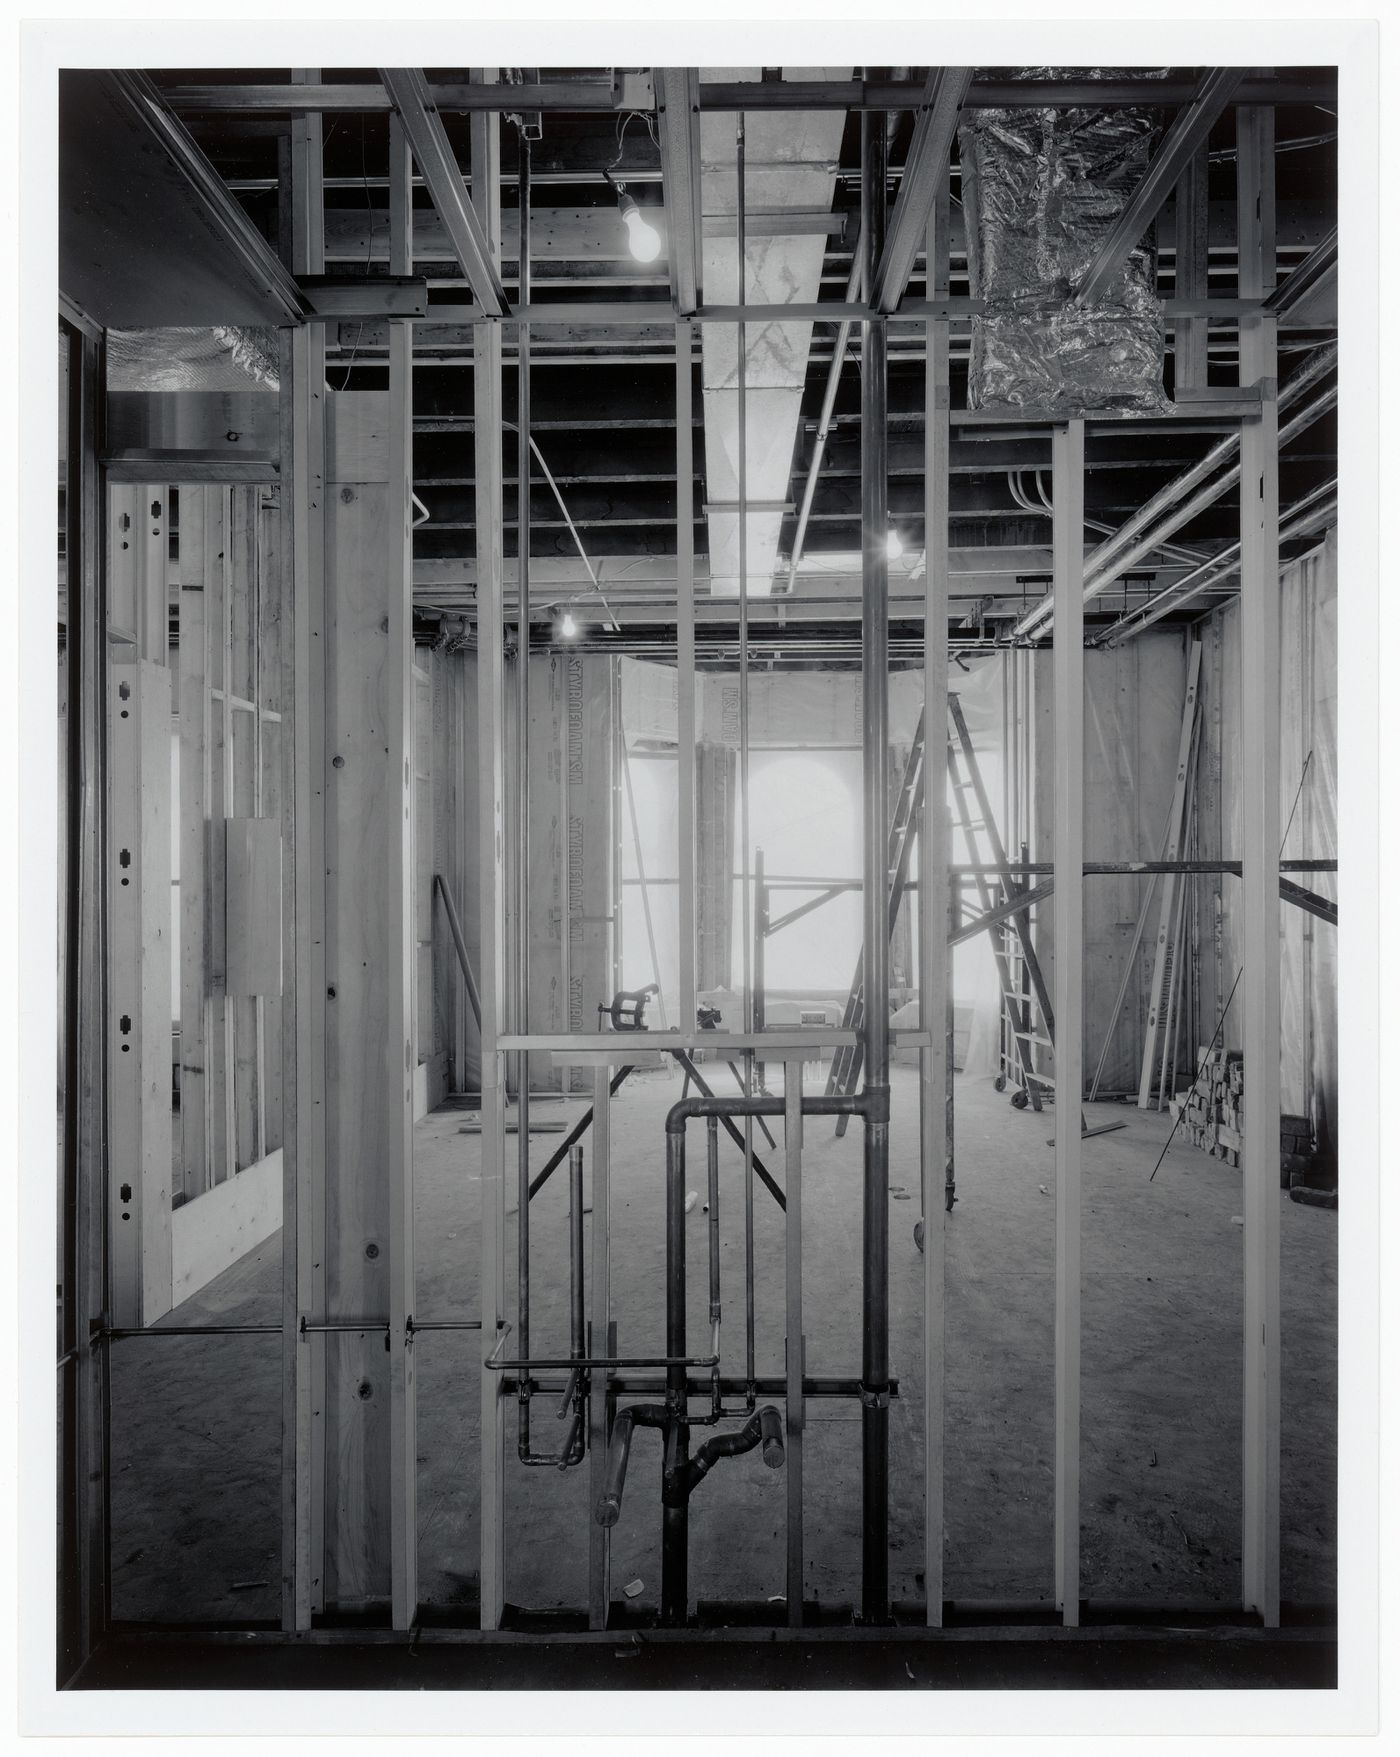 Interior view of a room showing open structural framework and plumbing pipes, Shaughnessy House under renovation, Montréal, Québec